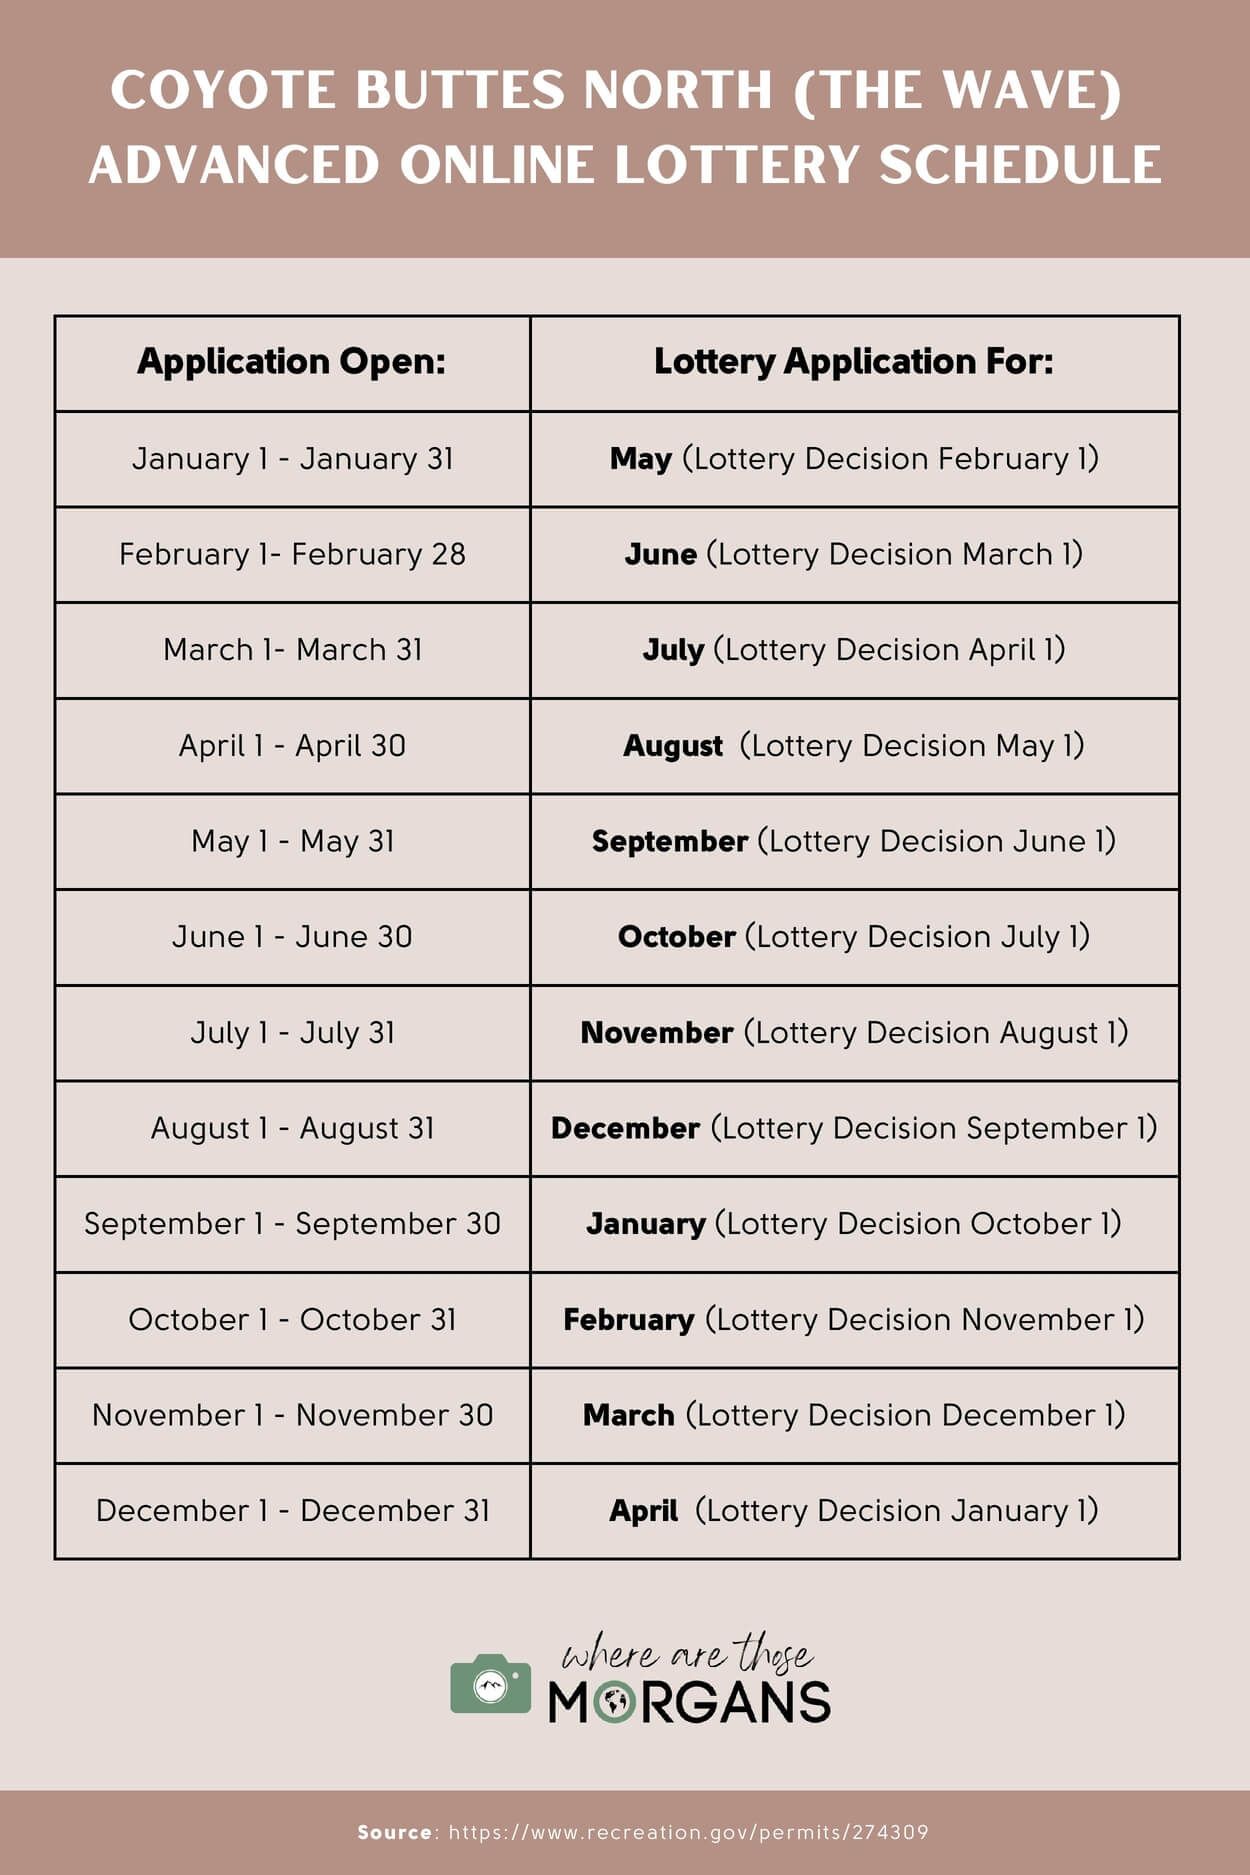 Advanced online lottery schedule for the wave when you should apply to hike the wave by month 4 months in advance